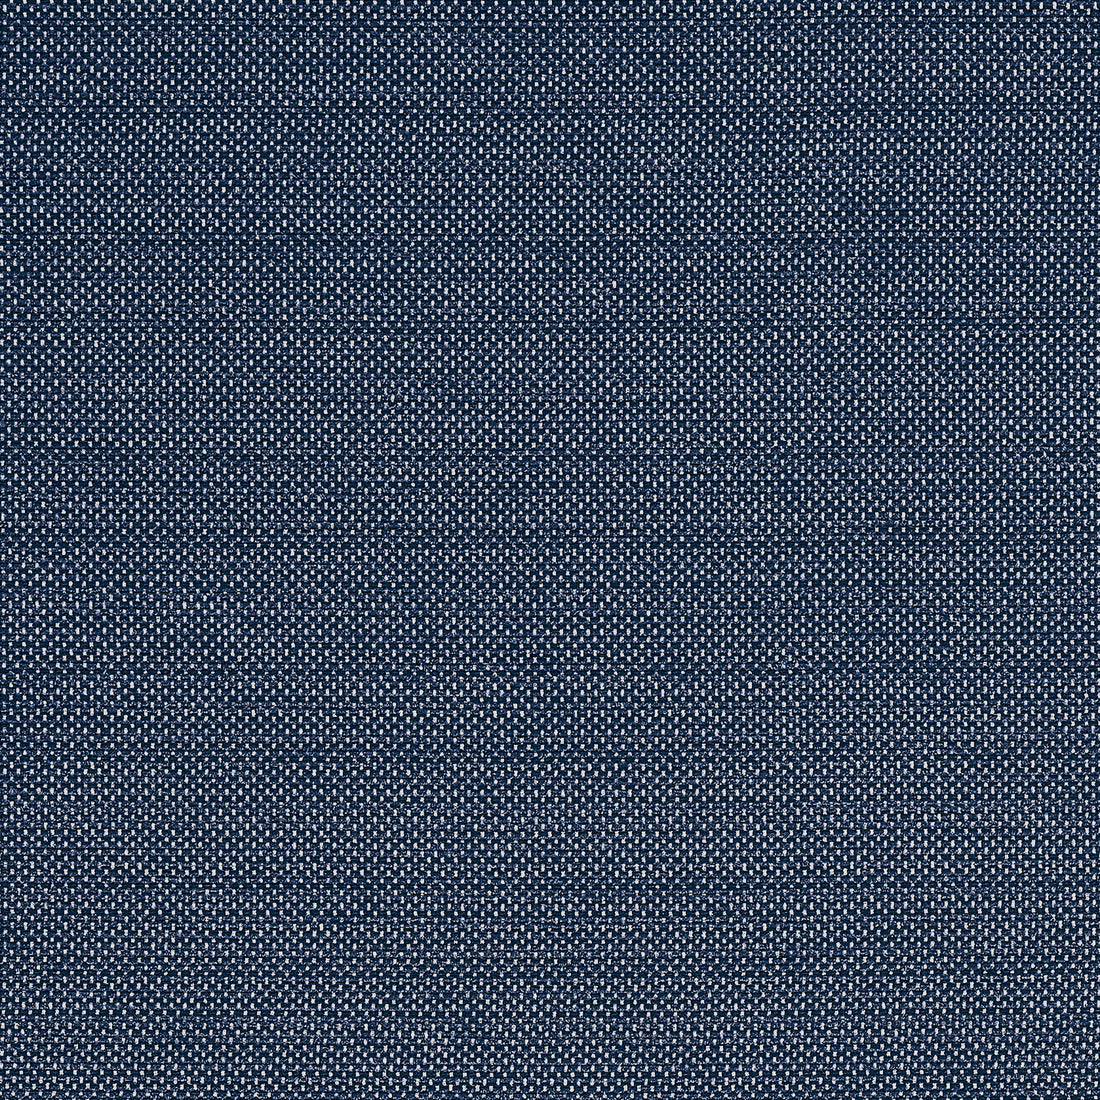 Cameron fabric in navy color - pattern number W81649 - by Thibaut in the Locale collection